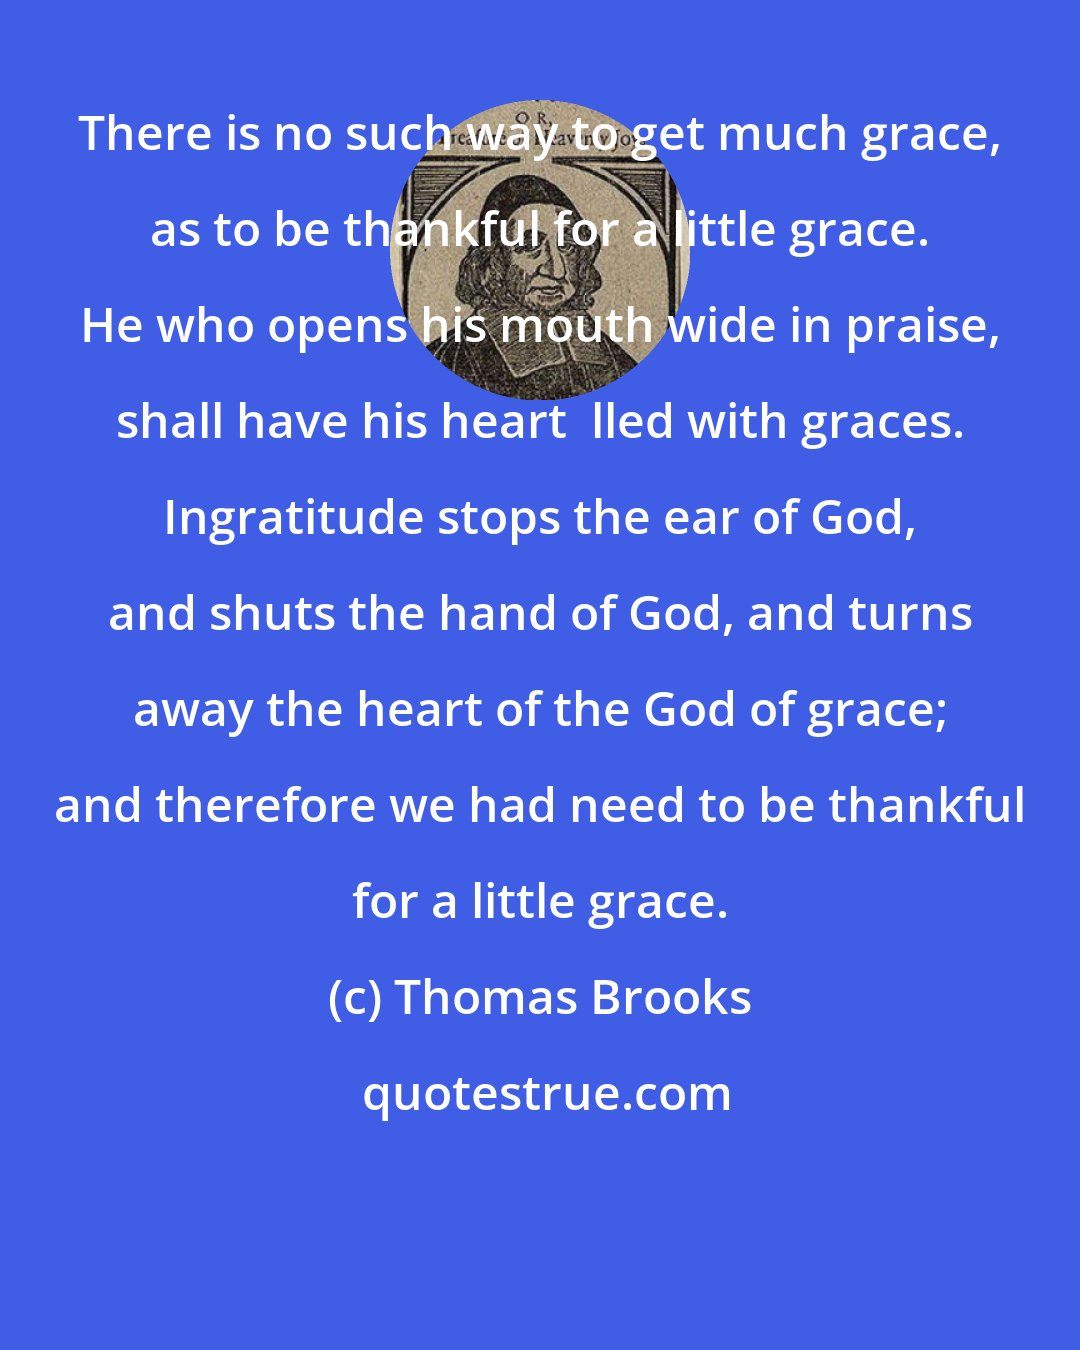 Thomas Brooks: There is no such way to get much grace, as to be thankful for a little grace. He who opens his mouth wide in praise, shall have his heart  lled with graces. Ingratitude stops the ear of God, and shuts the hand of God, and turns away the heart of the God of grace; and therefore we had need to be thankful for a little grace.